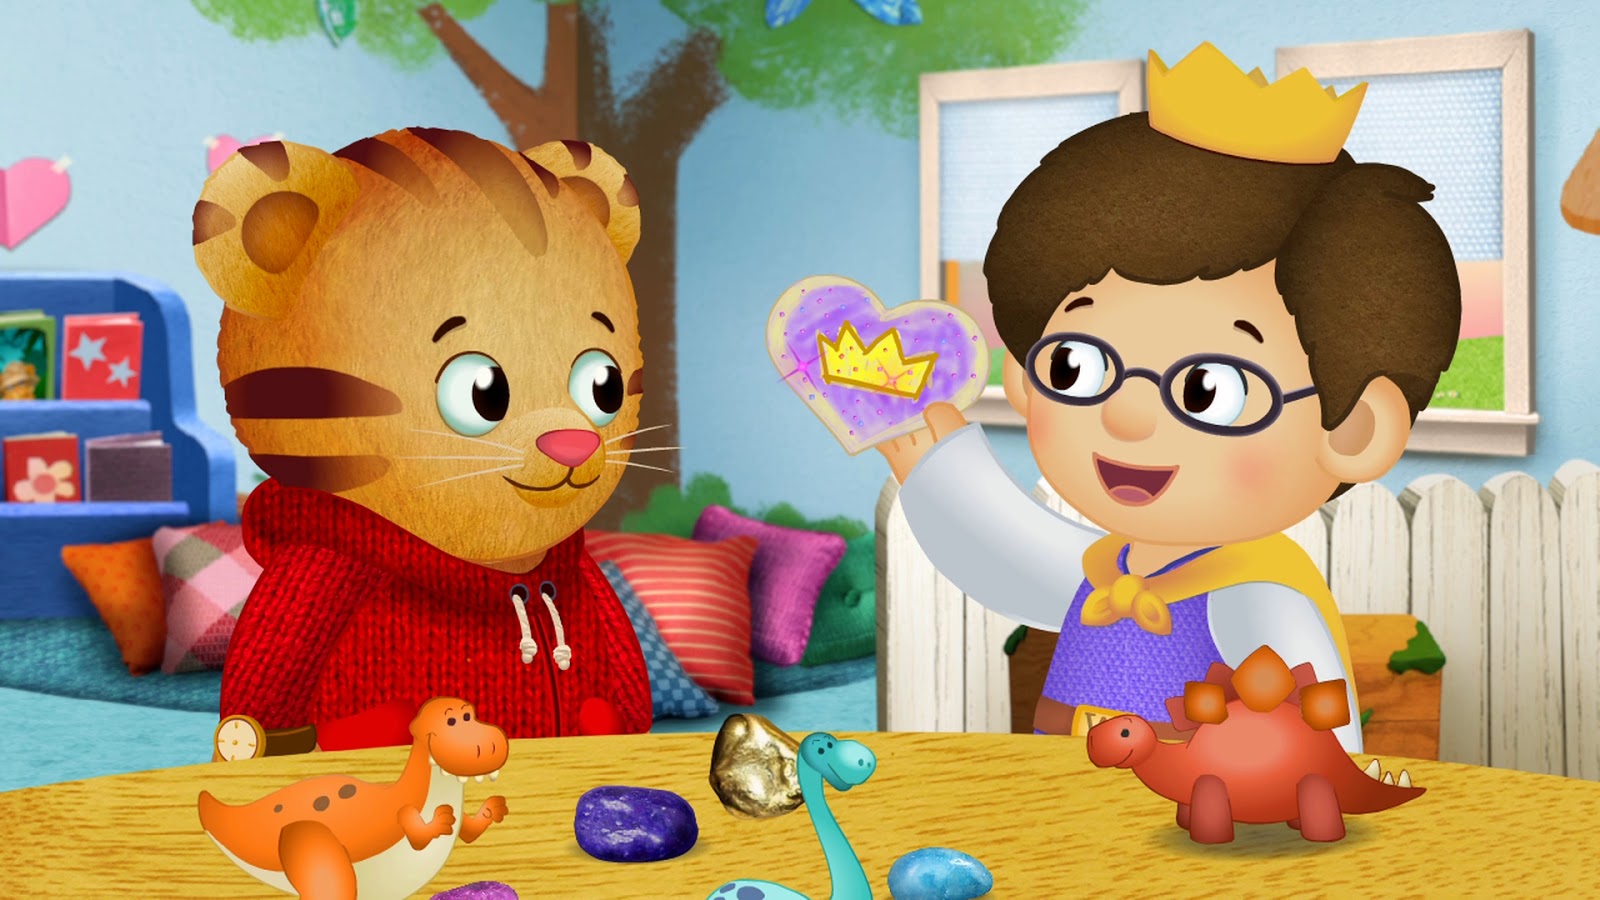 Easy Guide To Valentine’s Day Kid/Toddler Show Episodes on PBS Kids, Disney Jr. and Amazon